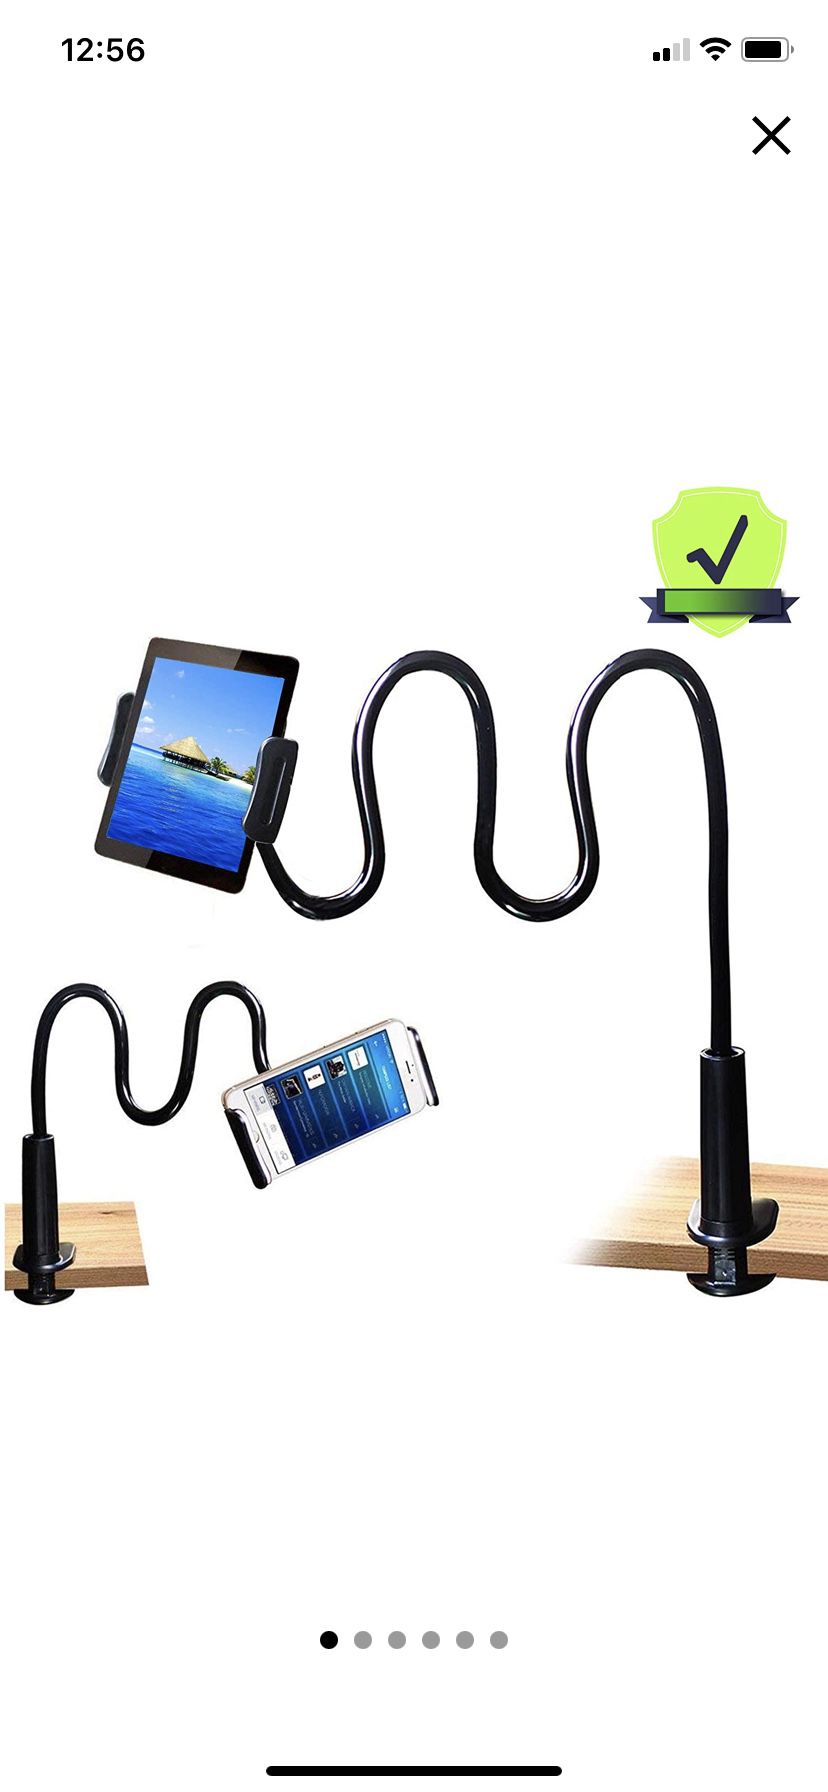 MAGIPEA Tablet Stand Holder, Mount Holder Clip with Grip Flexible Long Arm Gooseneck Compatible with ipad iPhone/Nintendo Switch/Samsung Galaxy Tabs/A